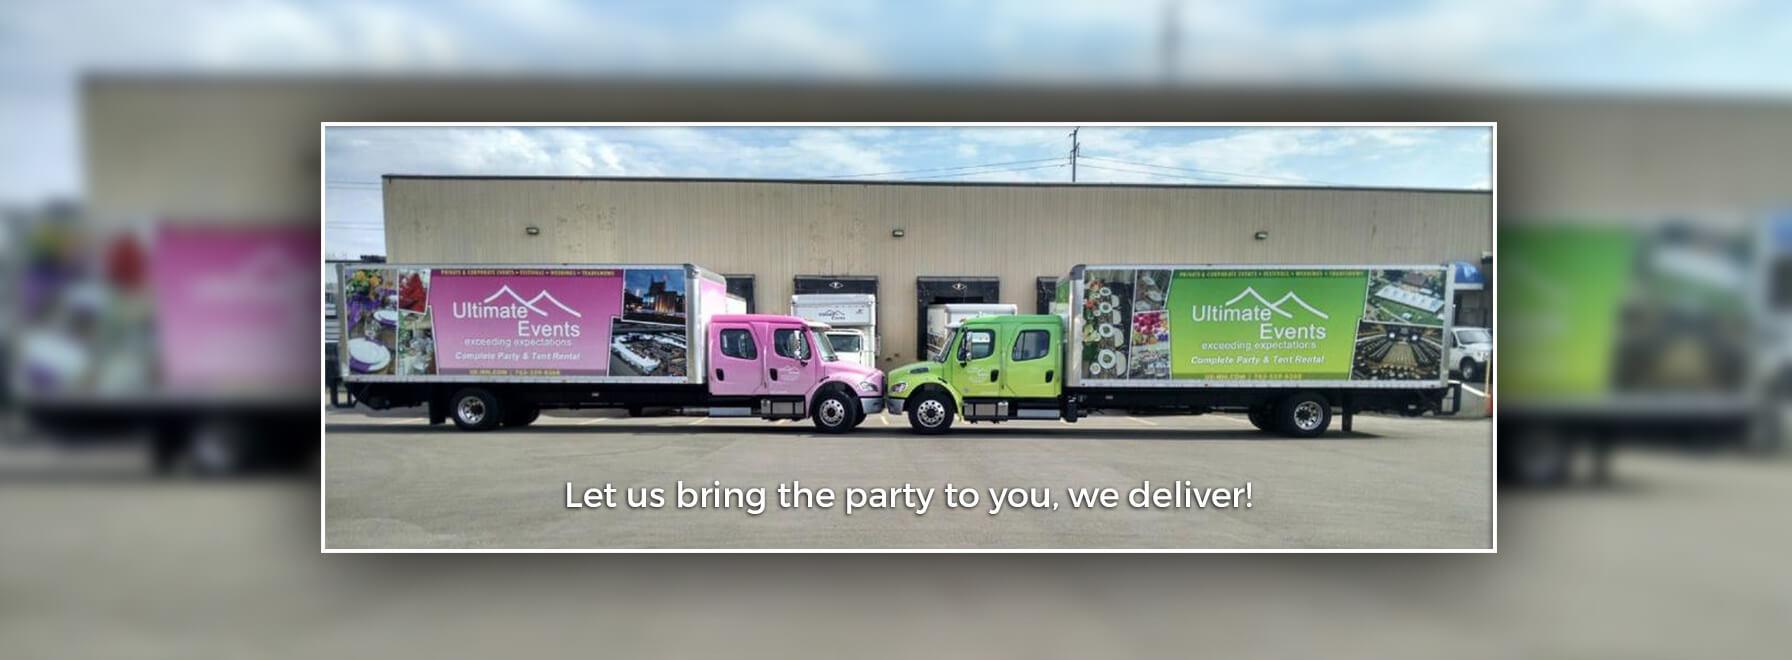 Let us bring the party to you, we deliver!